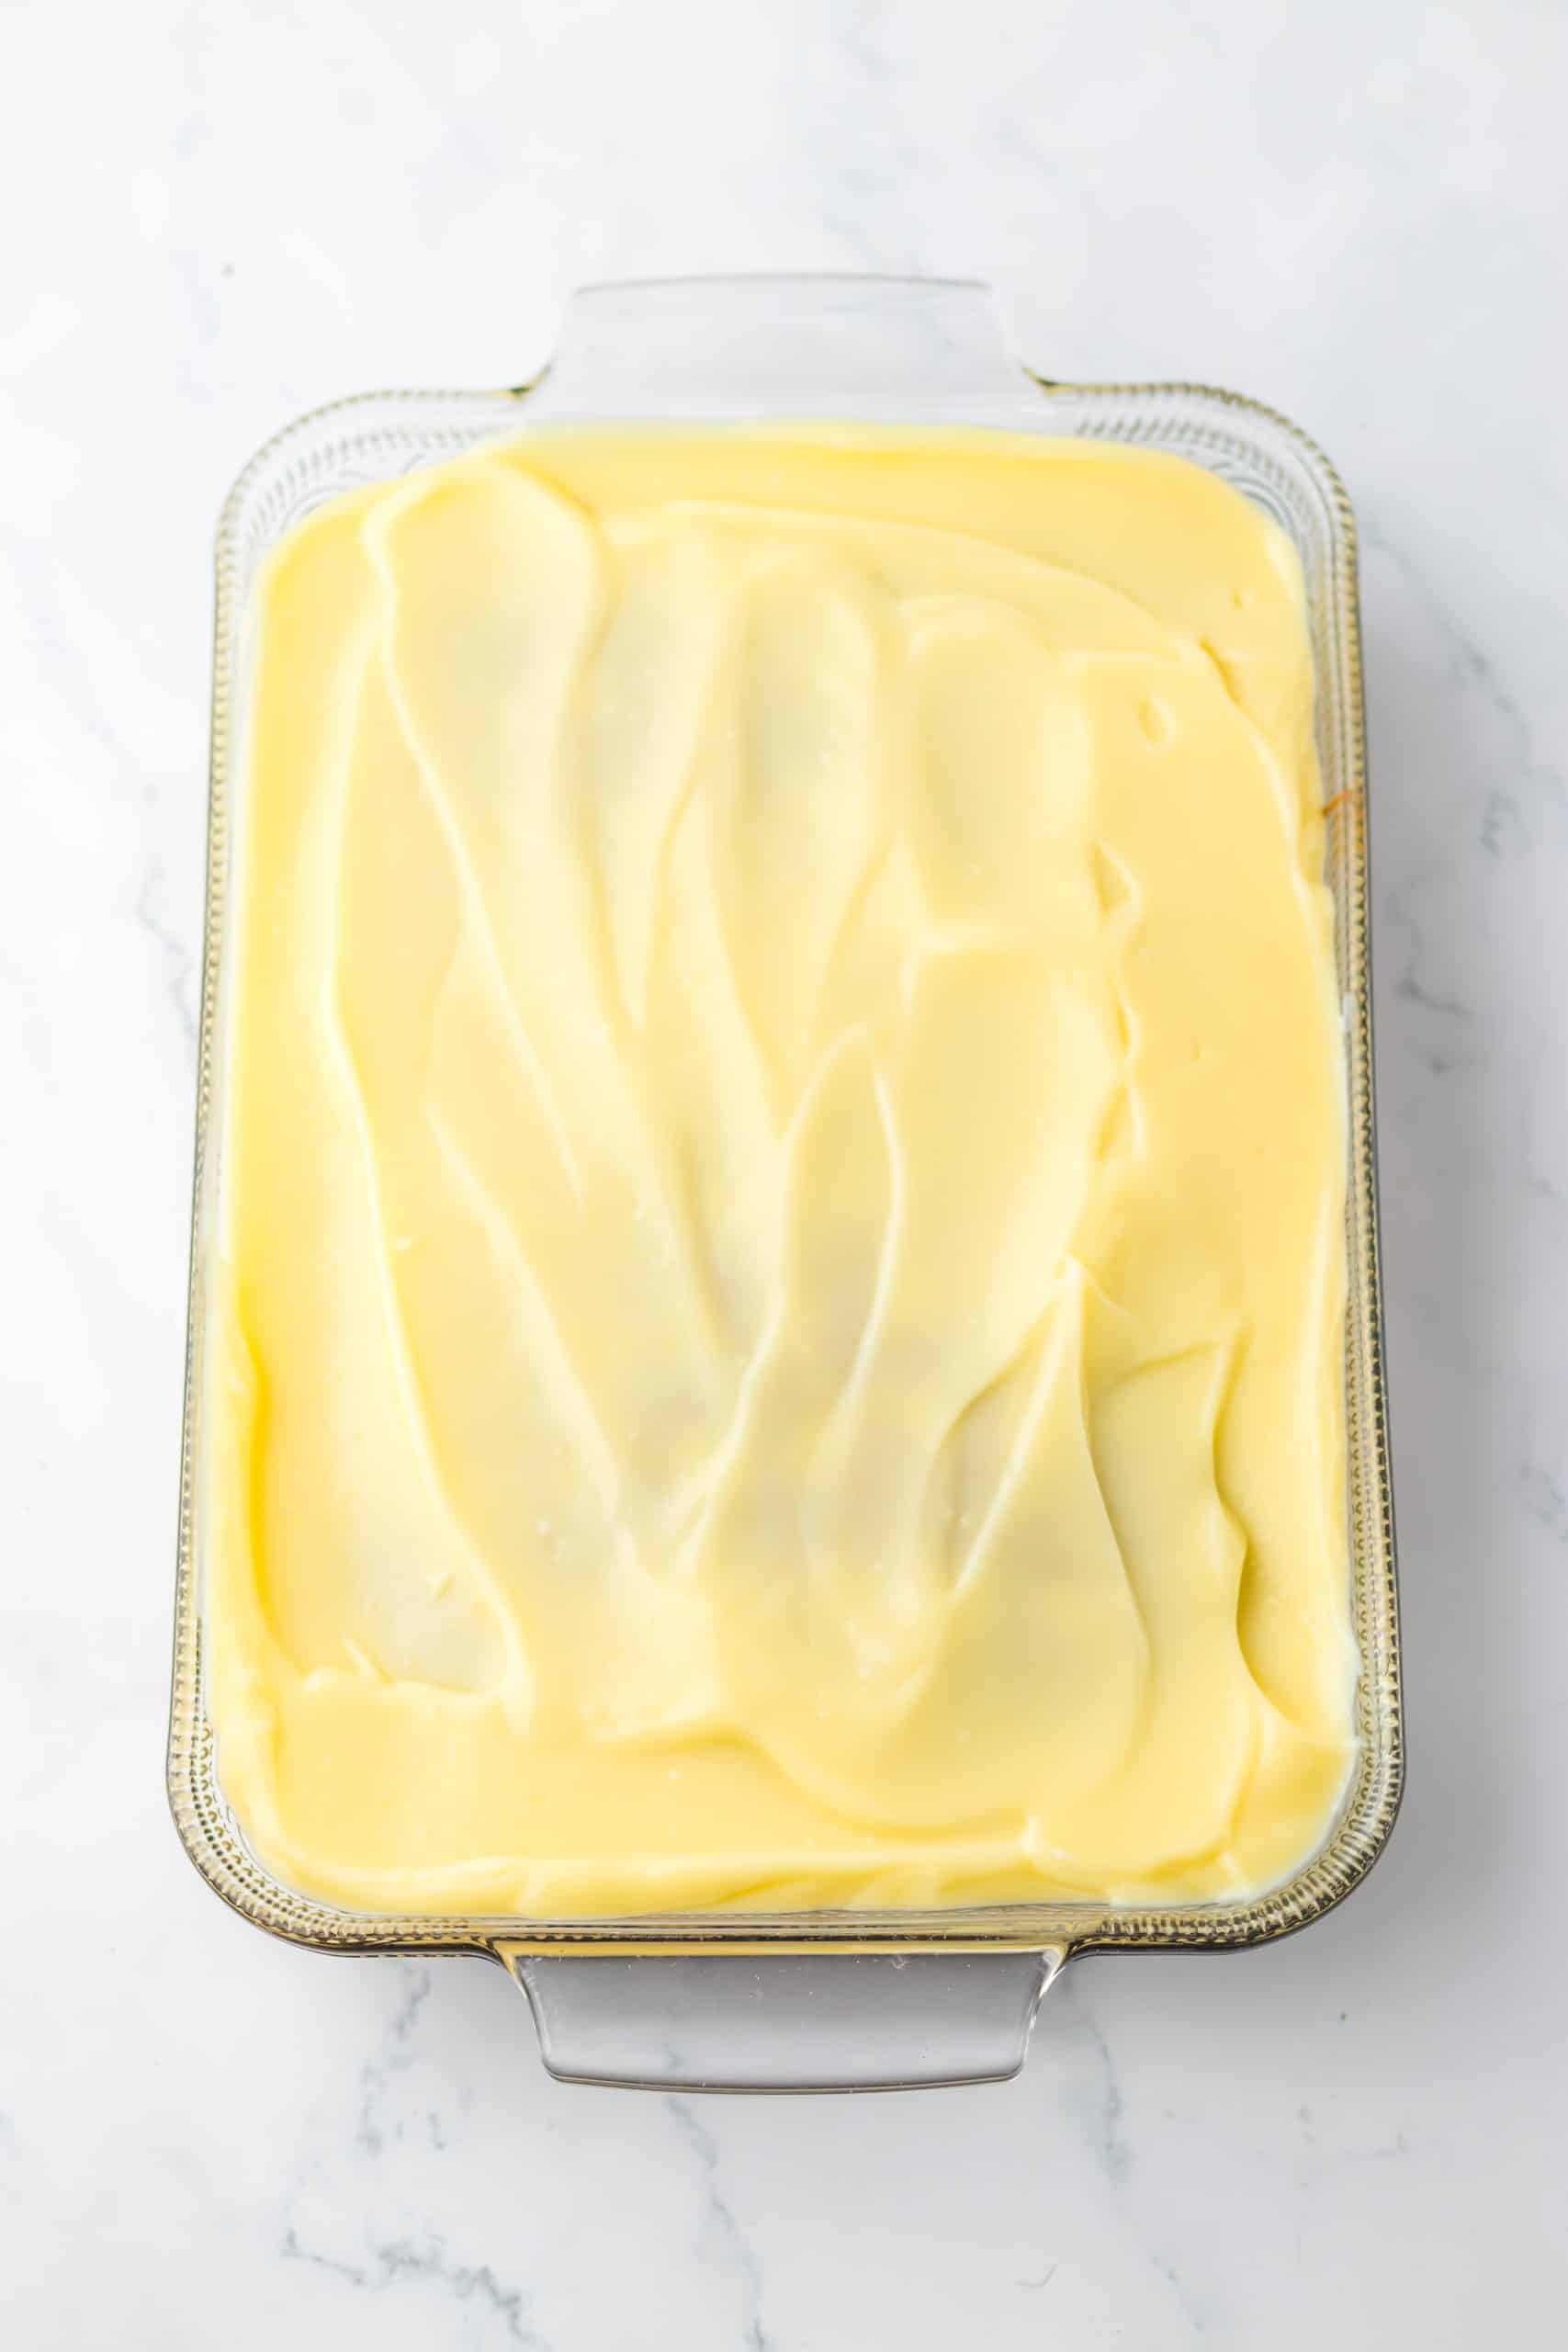 instant vanilla pudding spread out over the top of a baked carrot cake